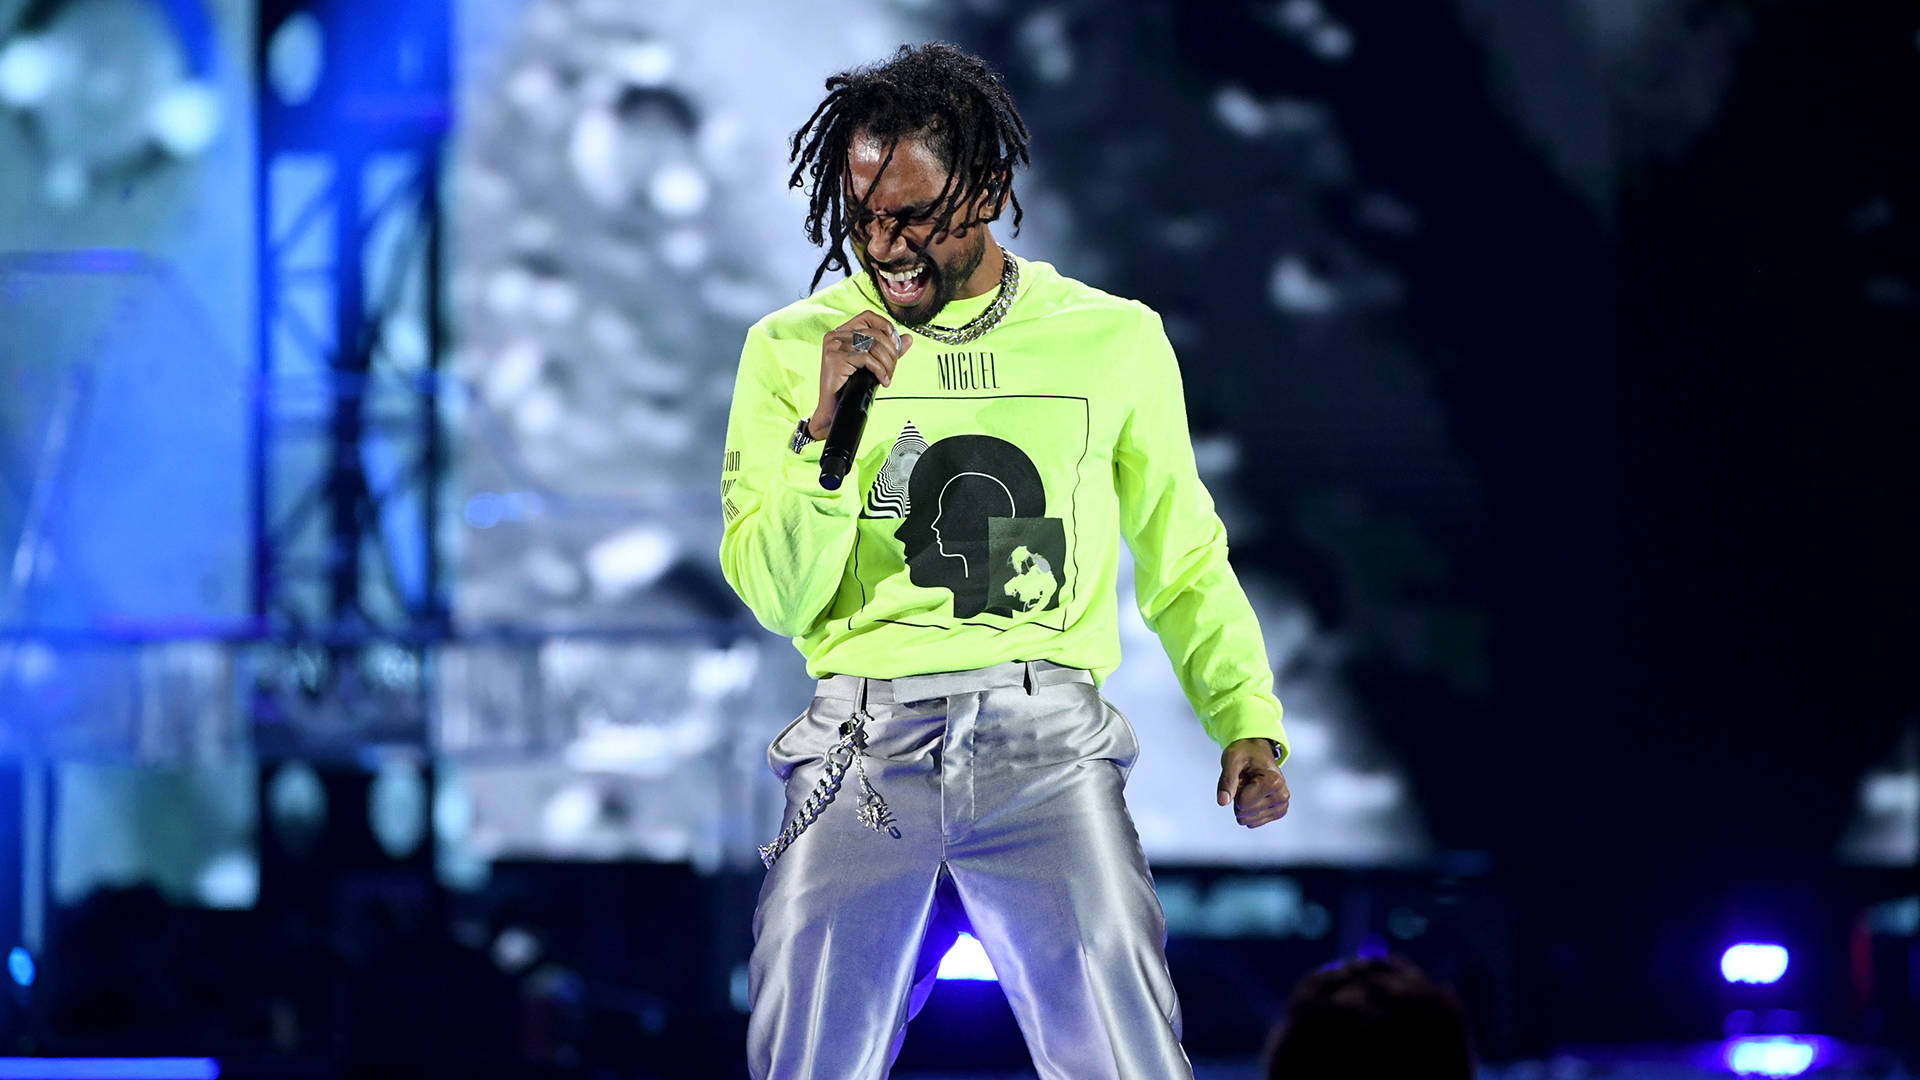 Miguel performs during the 2018 iHeartRadio Music Festival on September 21, 2018 in Las Vegas, Nevada.  Kevin Winter/Getty Images for iHeartMedia